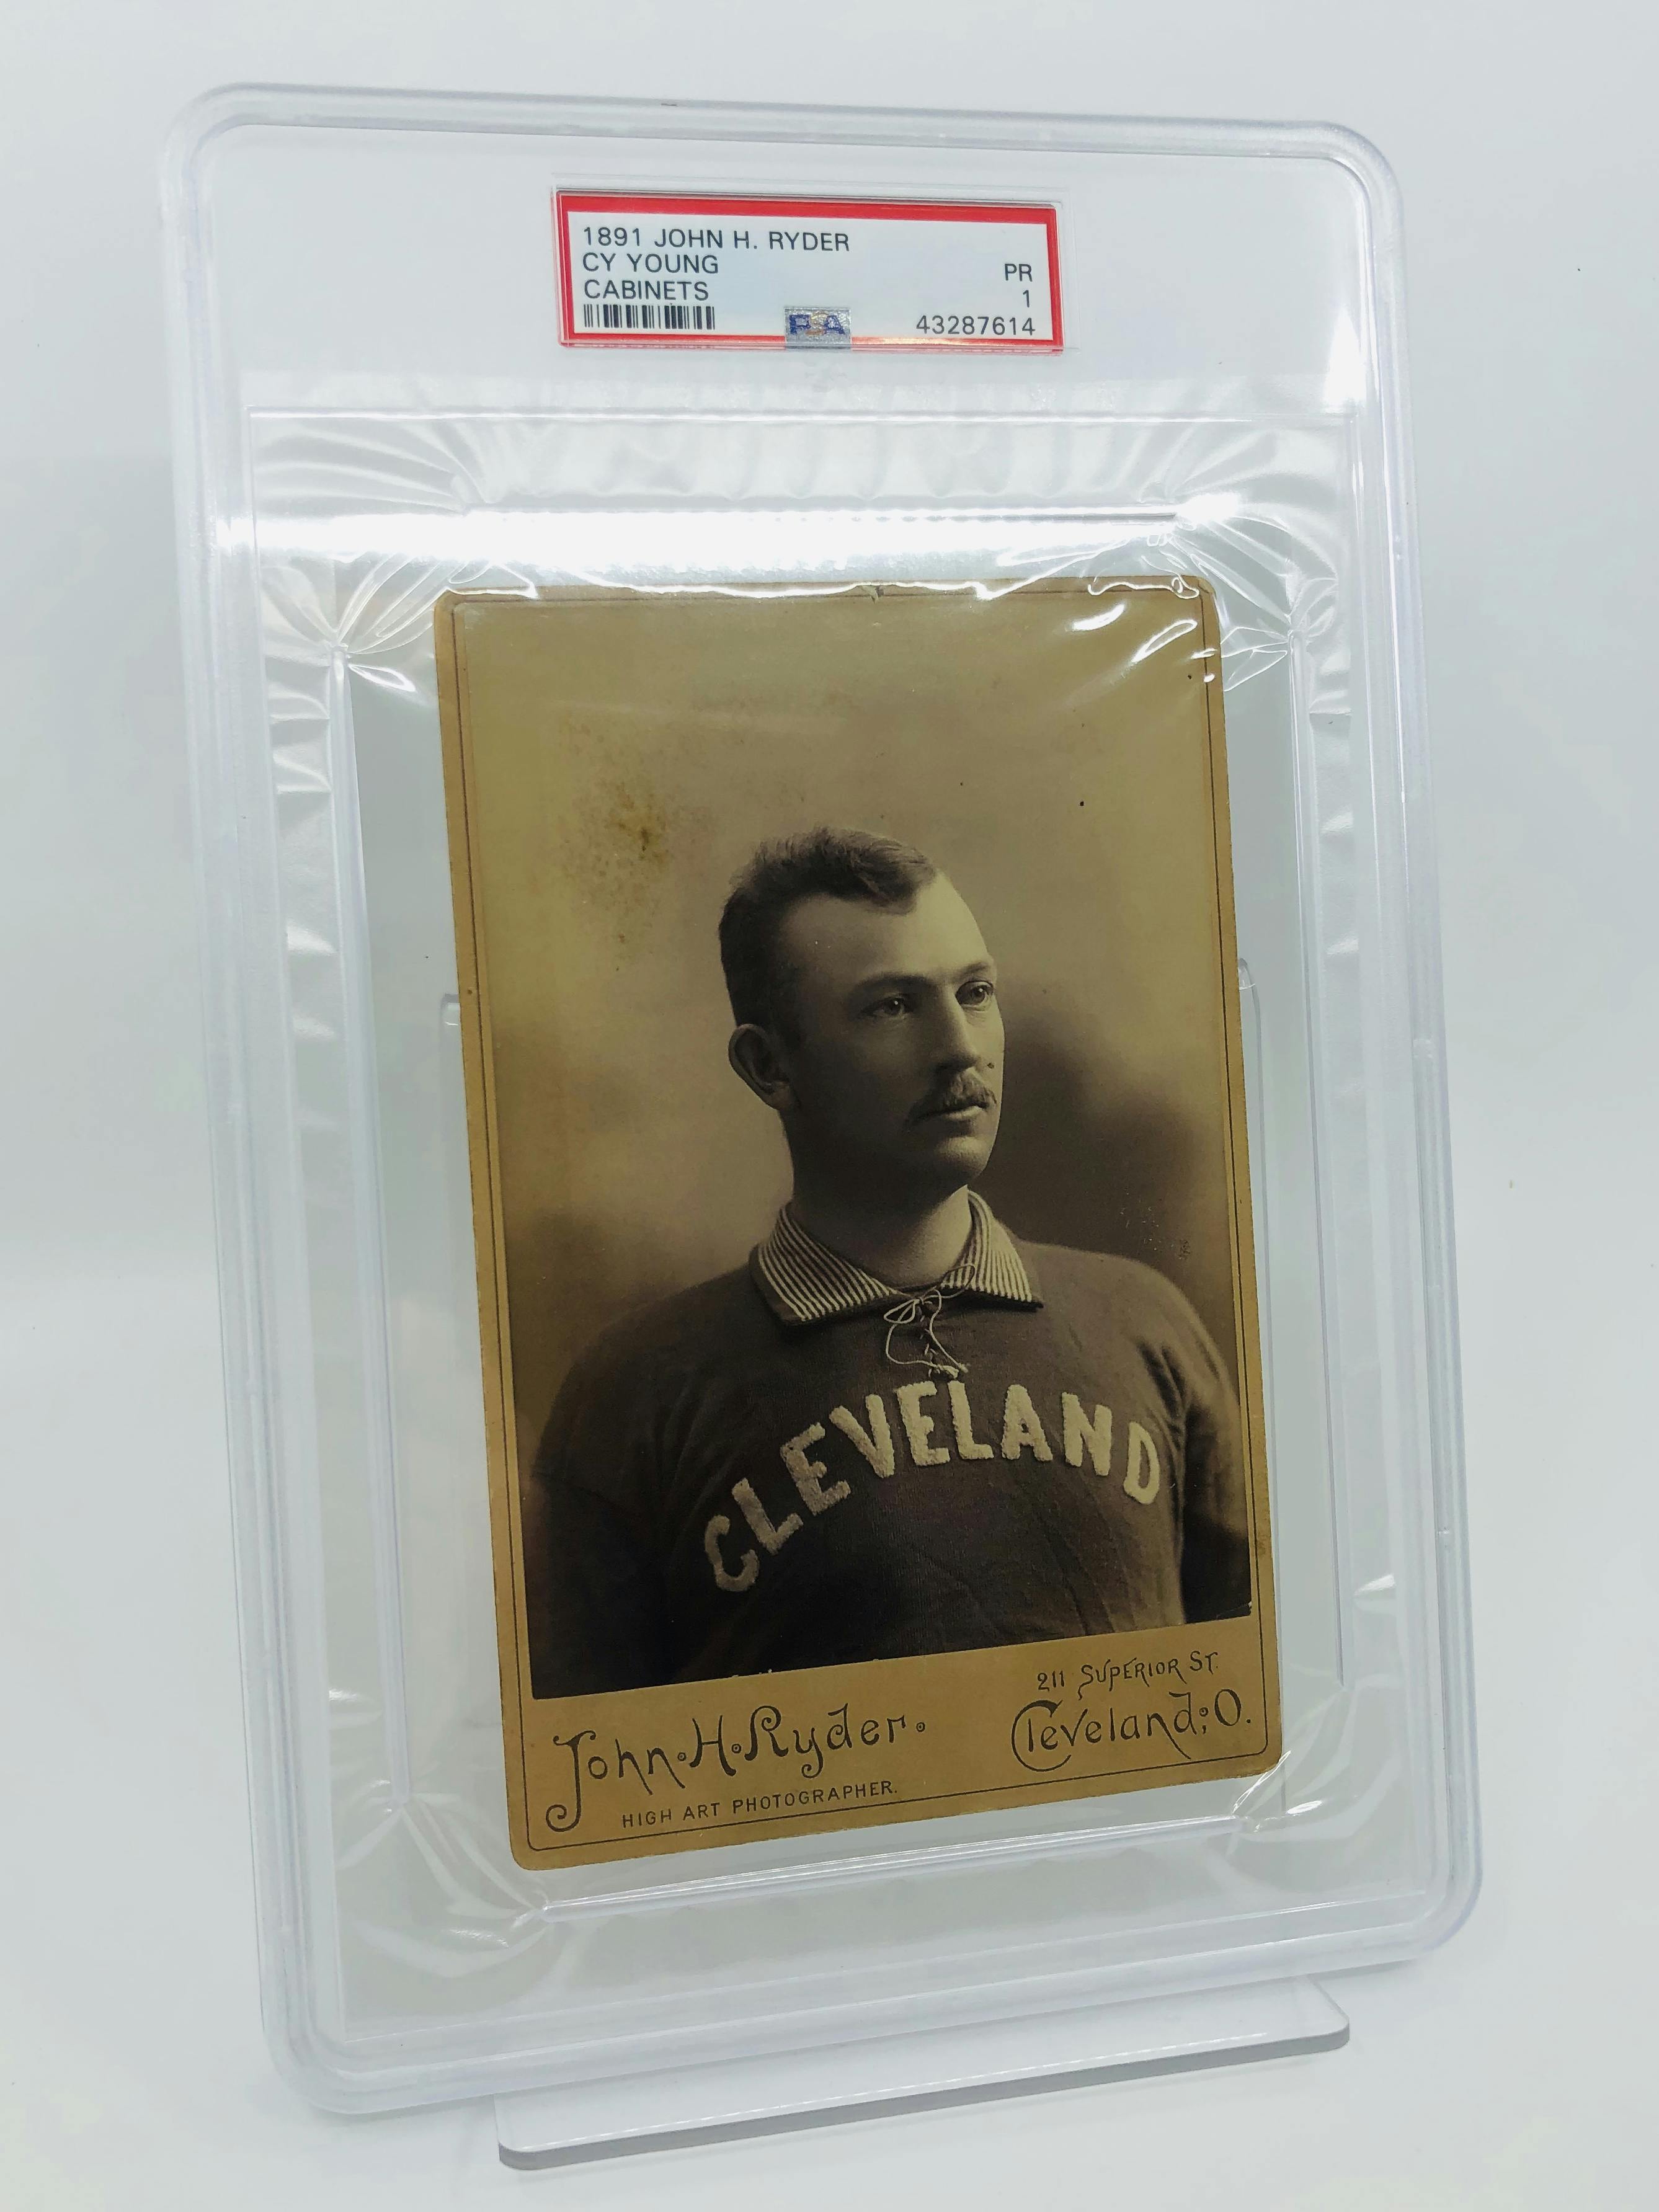 February 6th, 2014 “I'll Knock A Homer For You” Previews – Grey Flannel  Auctions Blog